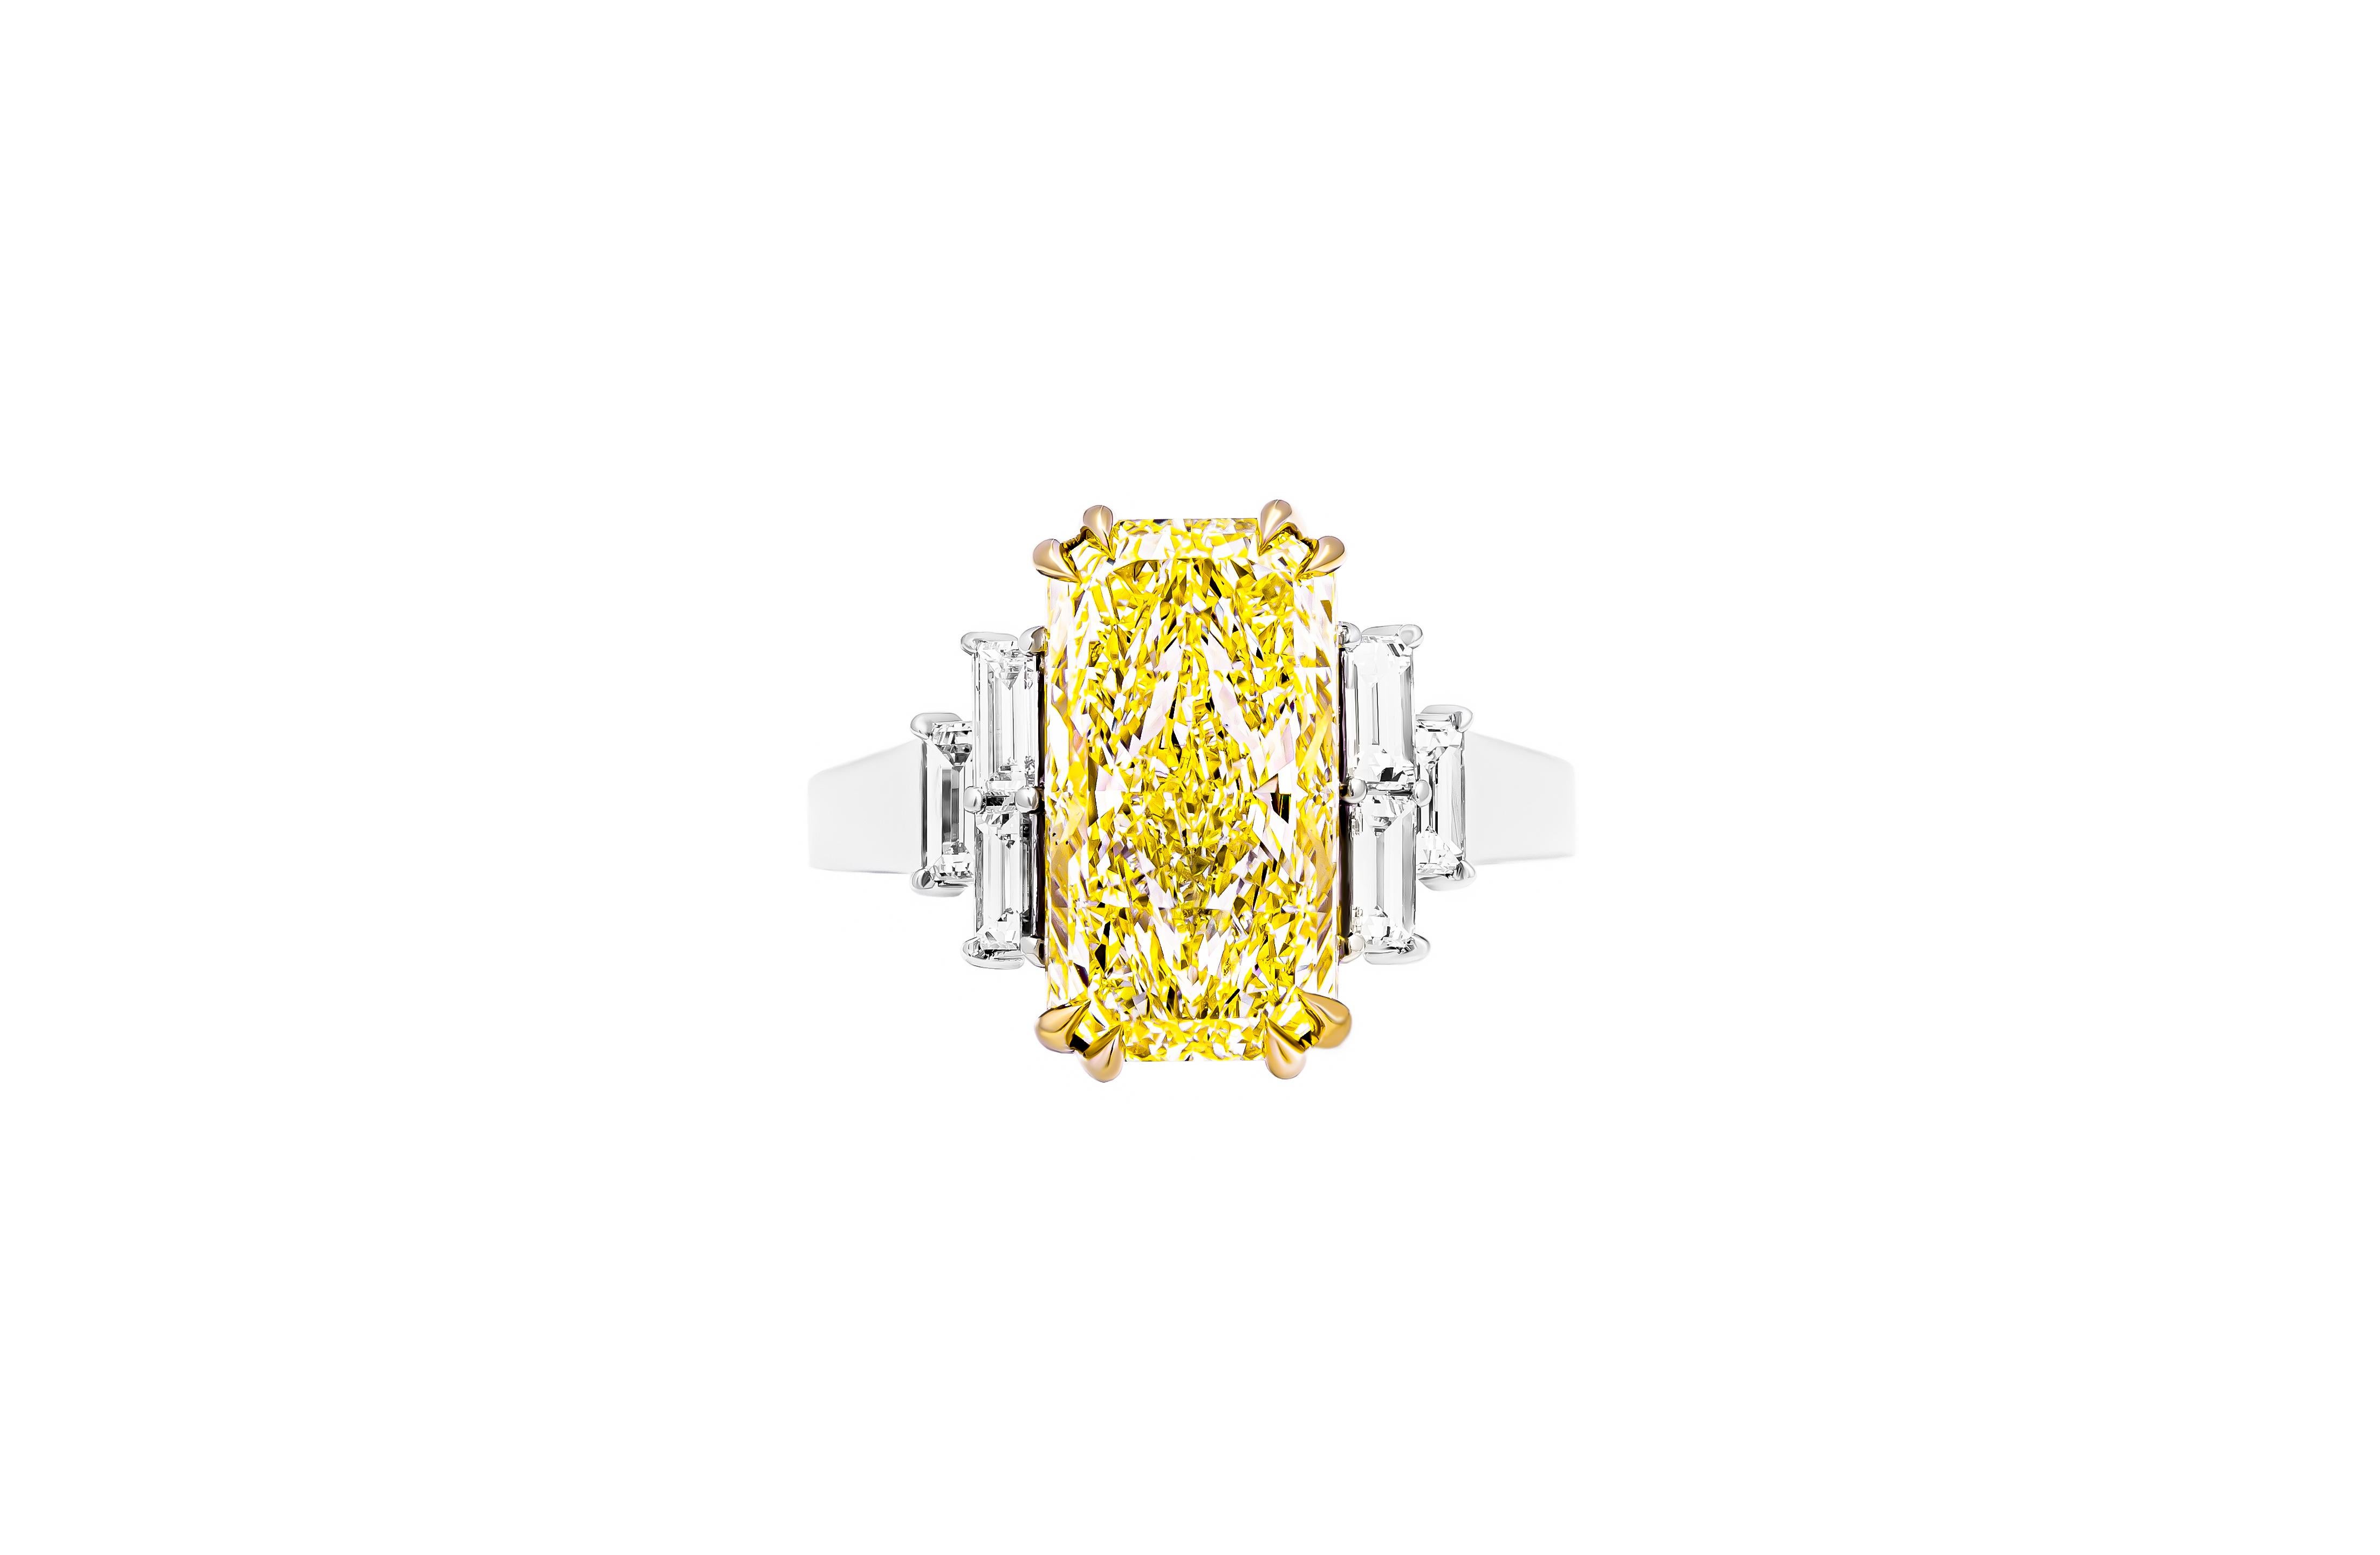 Introducing a truly exquisite and timeless masterpiece, this GIA certified 3 stone ring showcases unparalleled craftsmanship and sophistication. Crafted with precision in a luxurious blend of 950 platinum and 18k yellow gold, this ring is a stunning